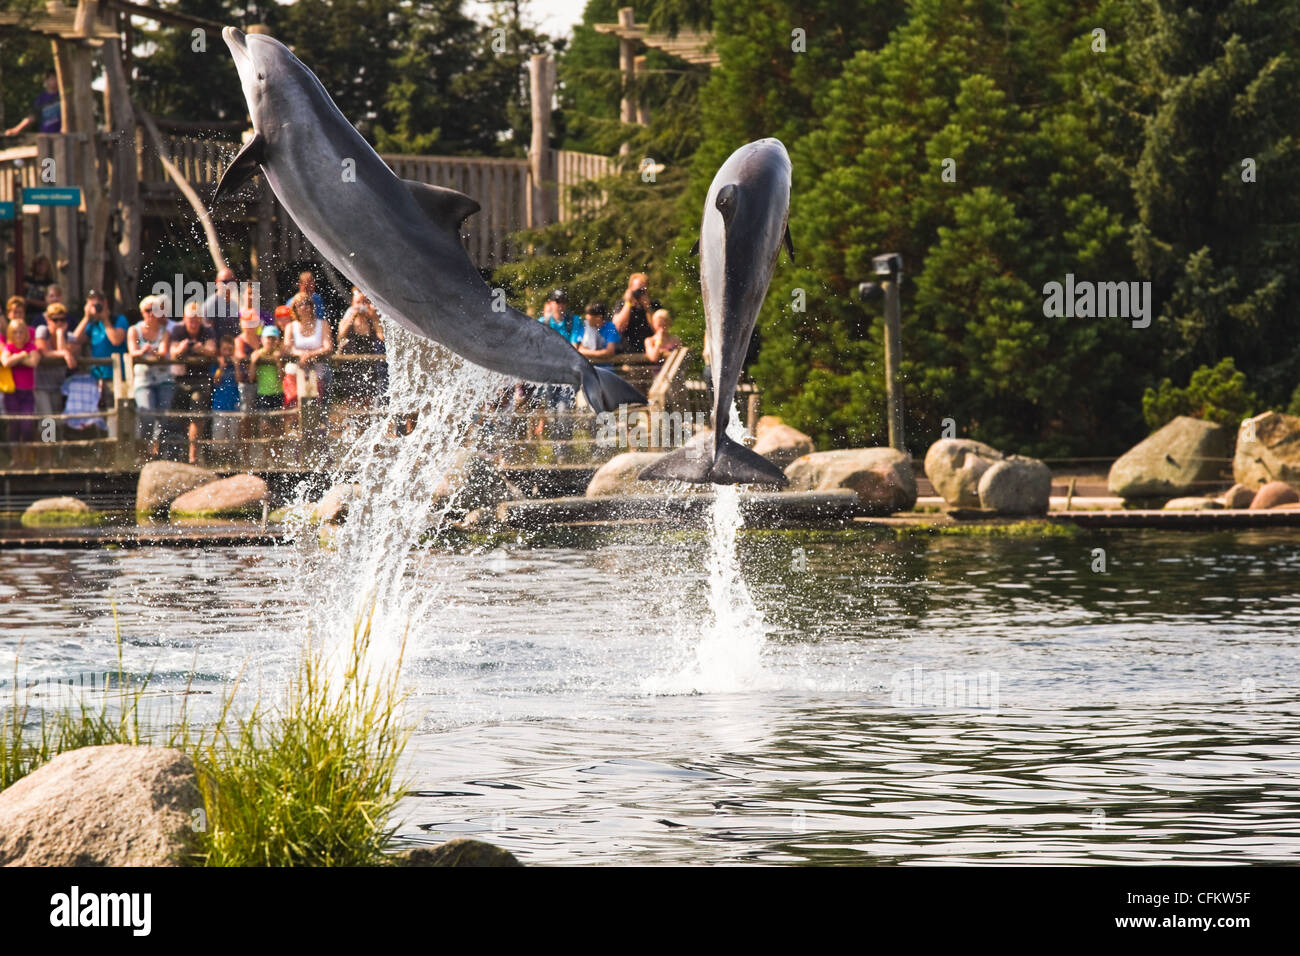 Bottlenose dolphins having fun by jumping high out of the water. Stock Photo